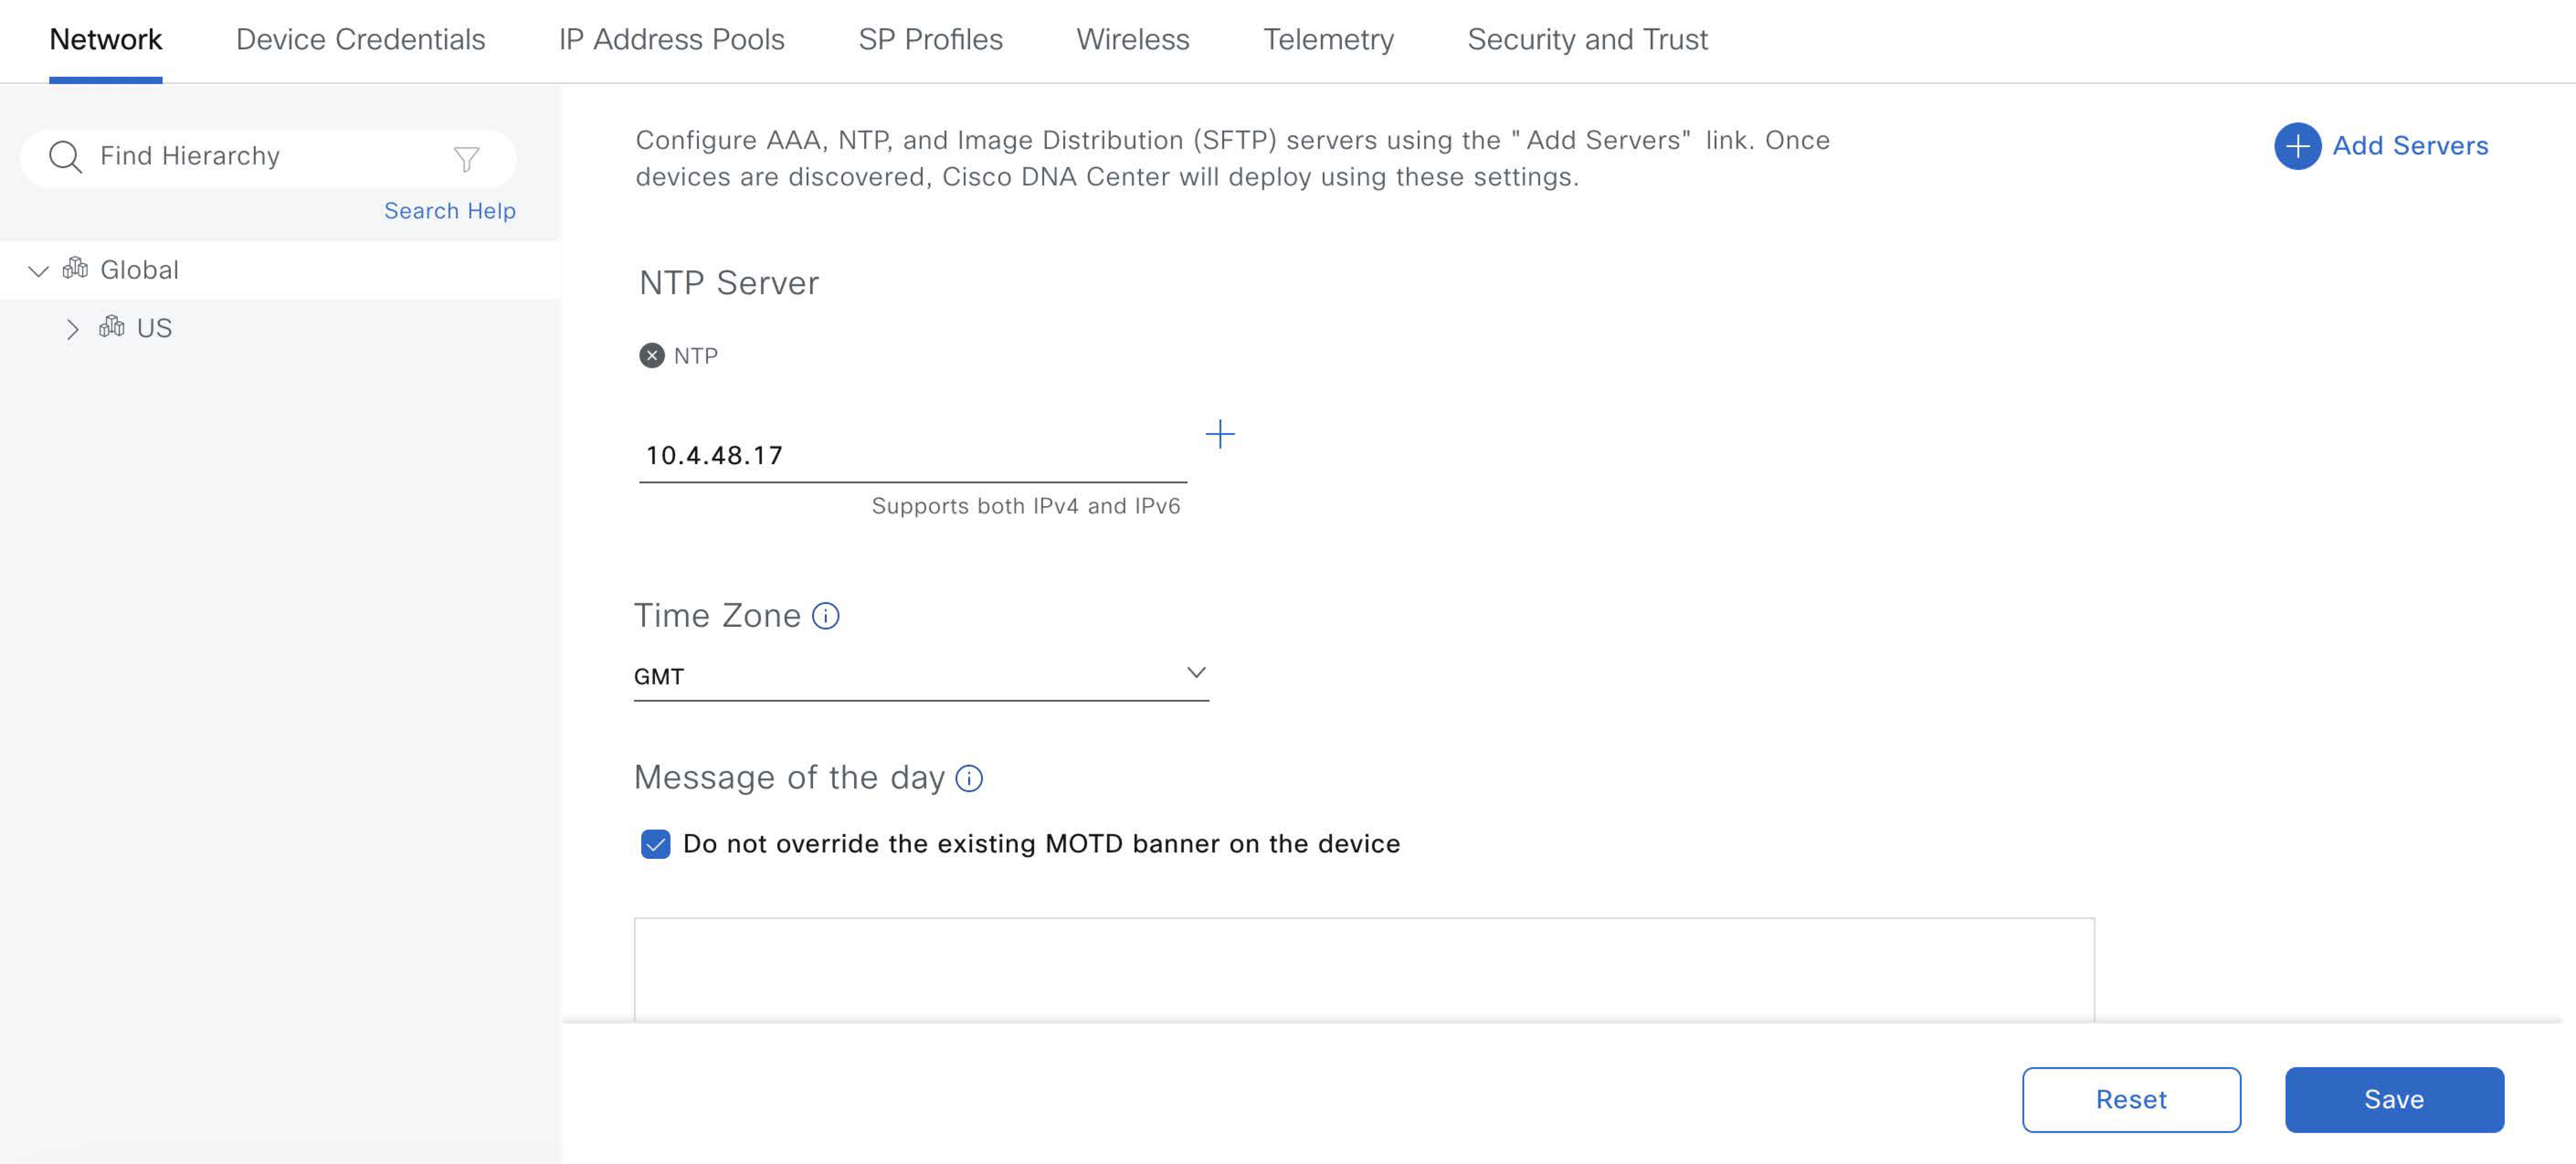 The NTP Server section displays the configuration options for the NTP server.